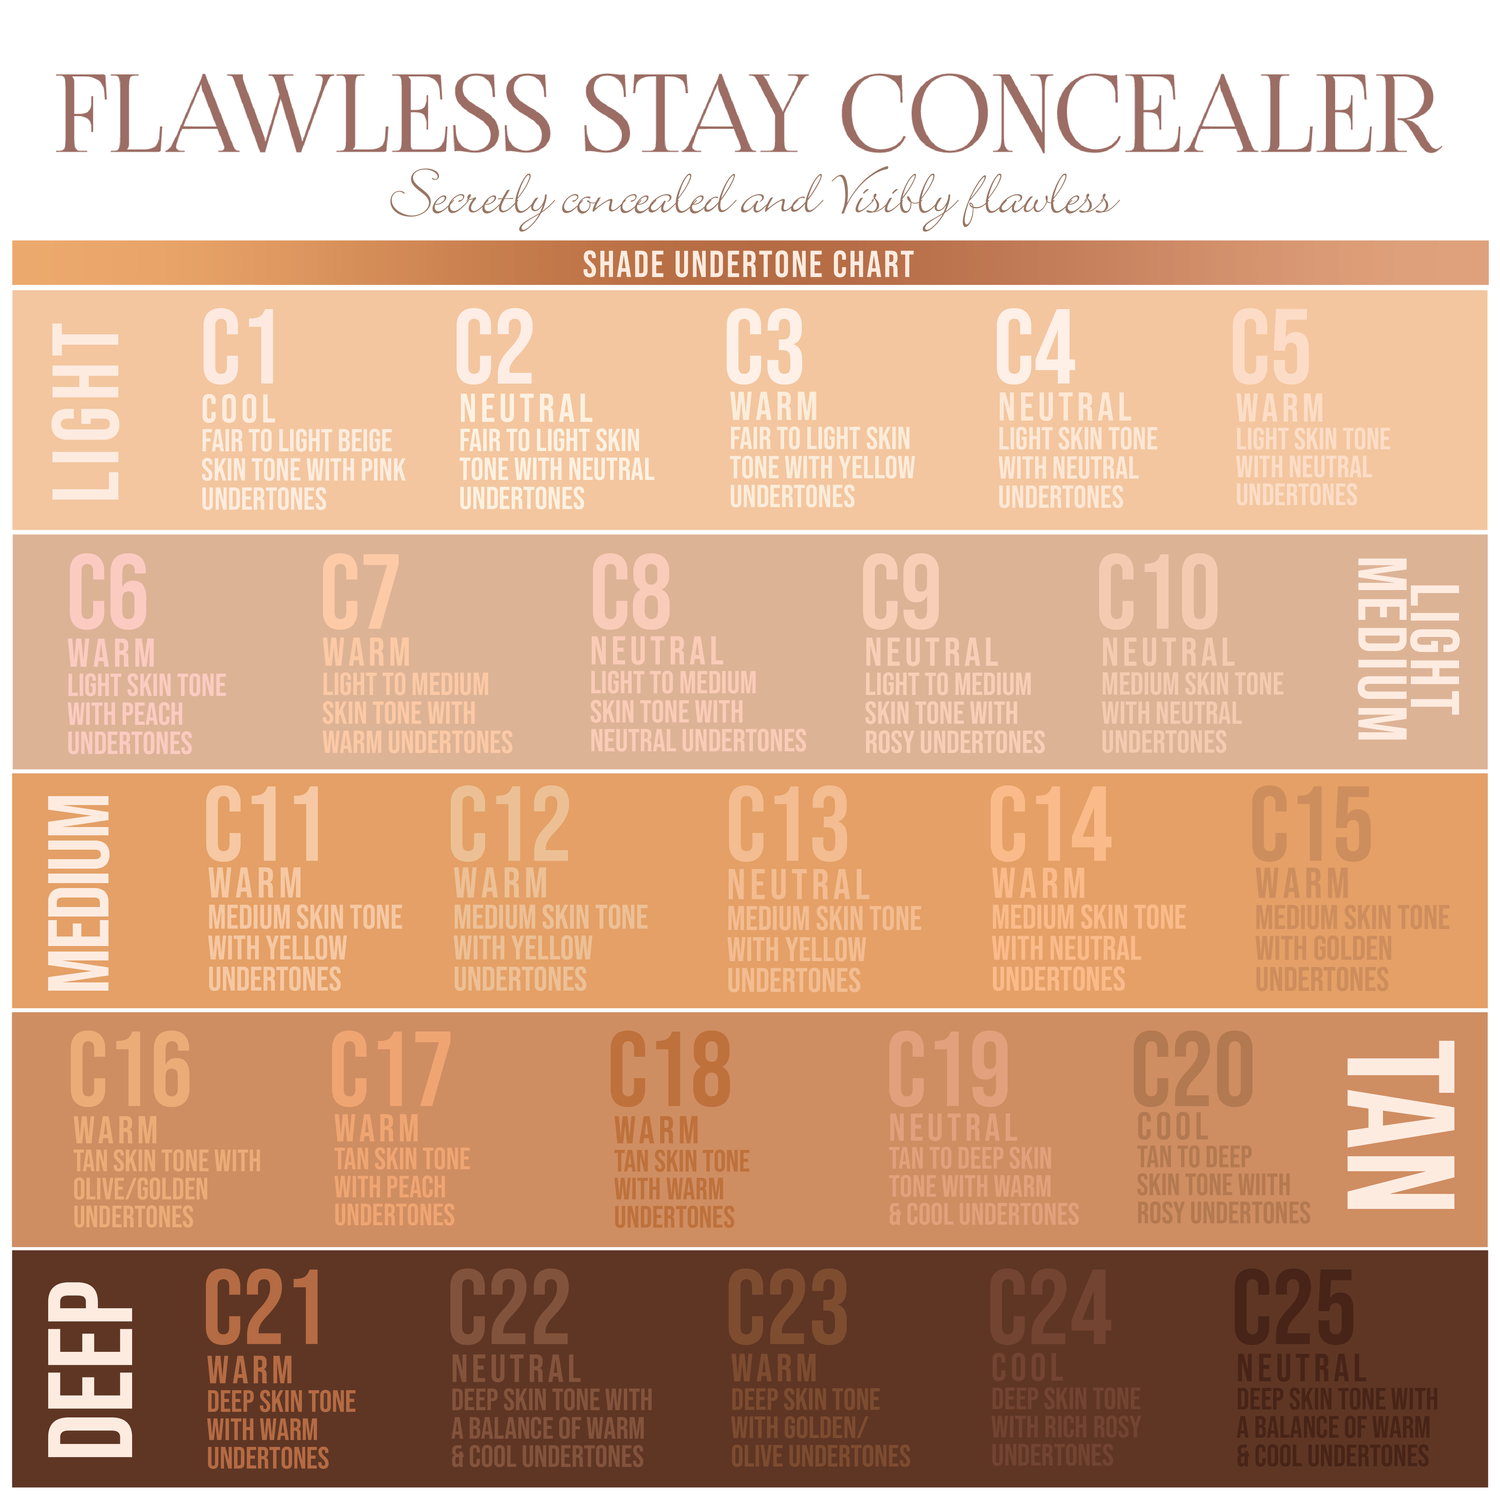 Beauty Creations - Flawless Stay Concealer